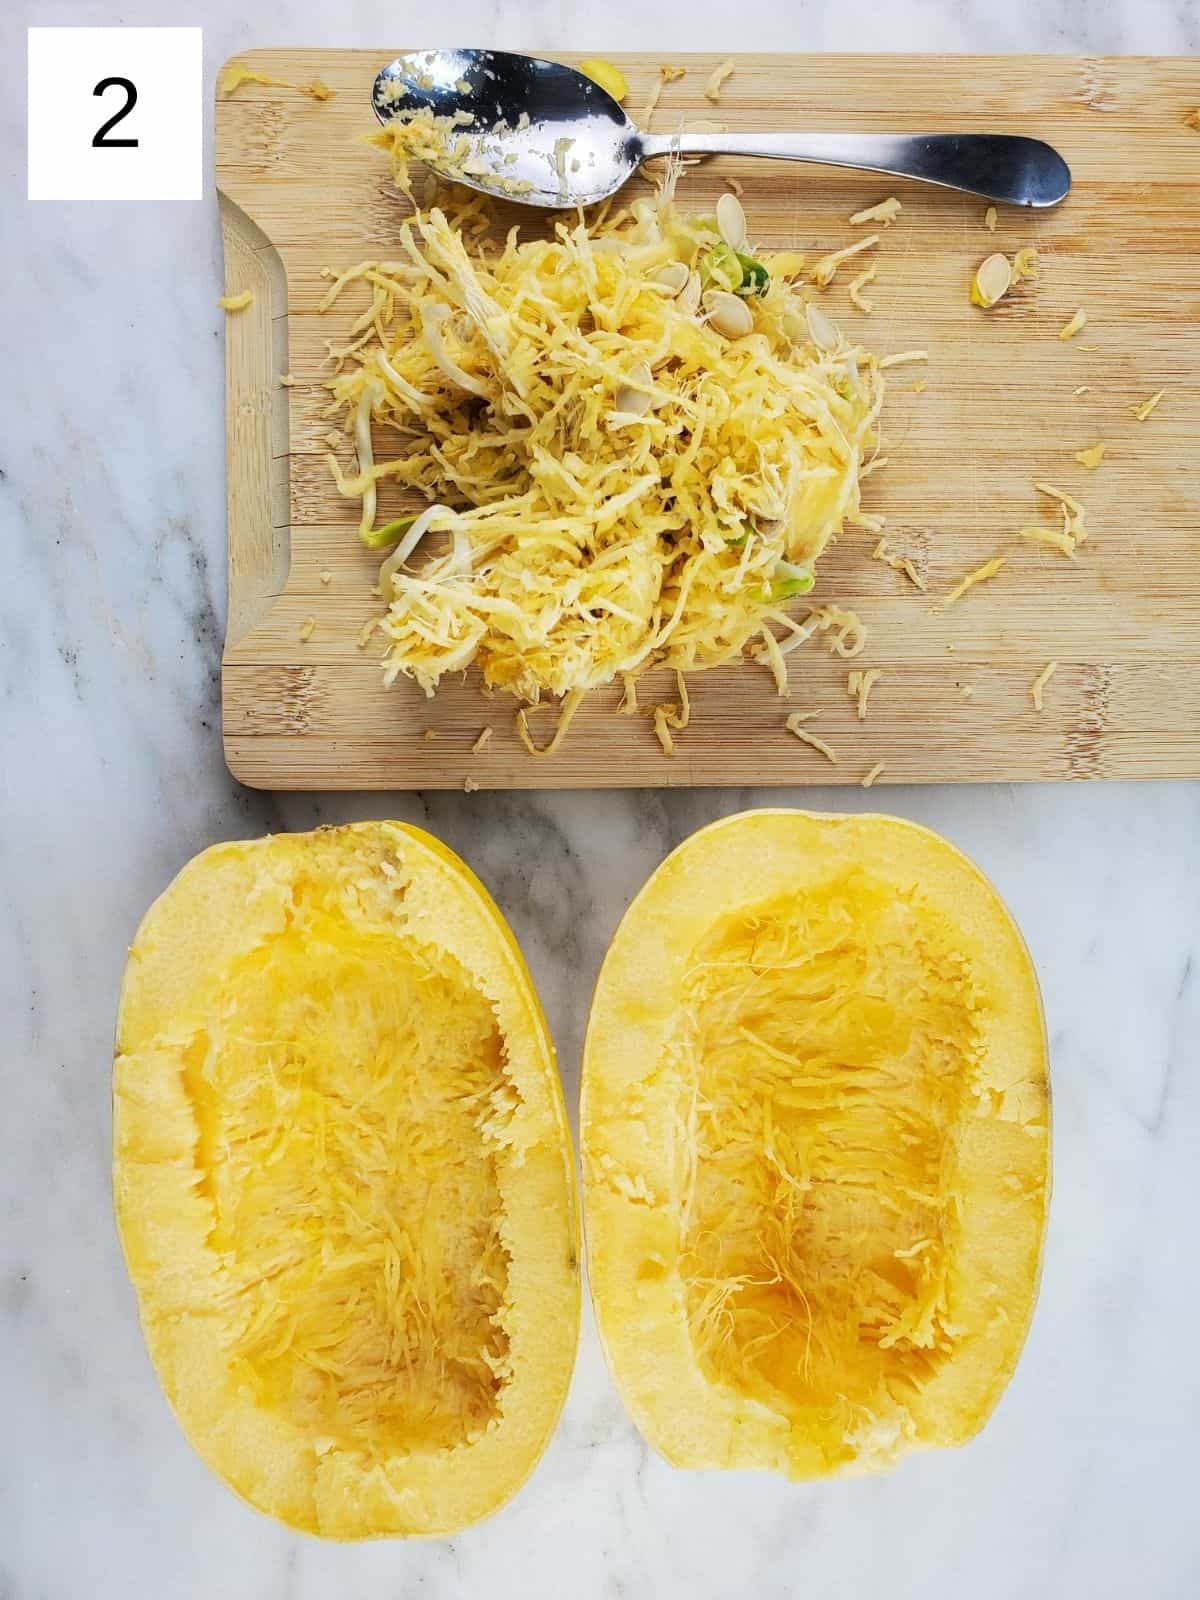 scooped out seeds of spaghetti squash on a wooden cutting board.